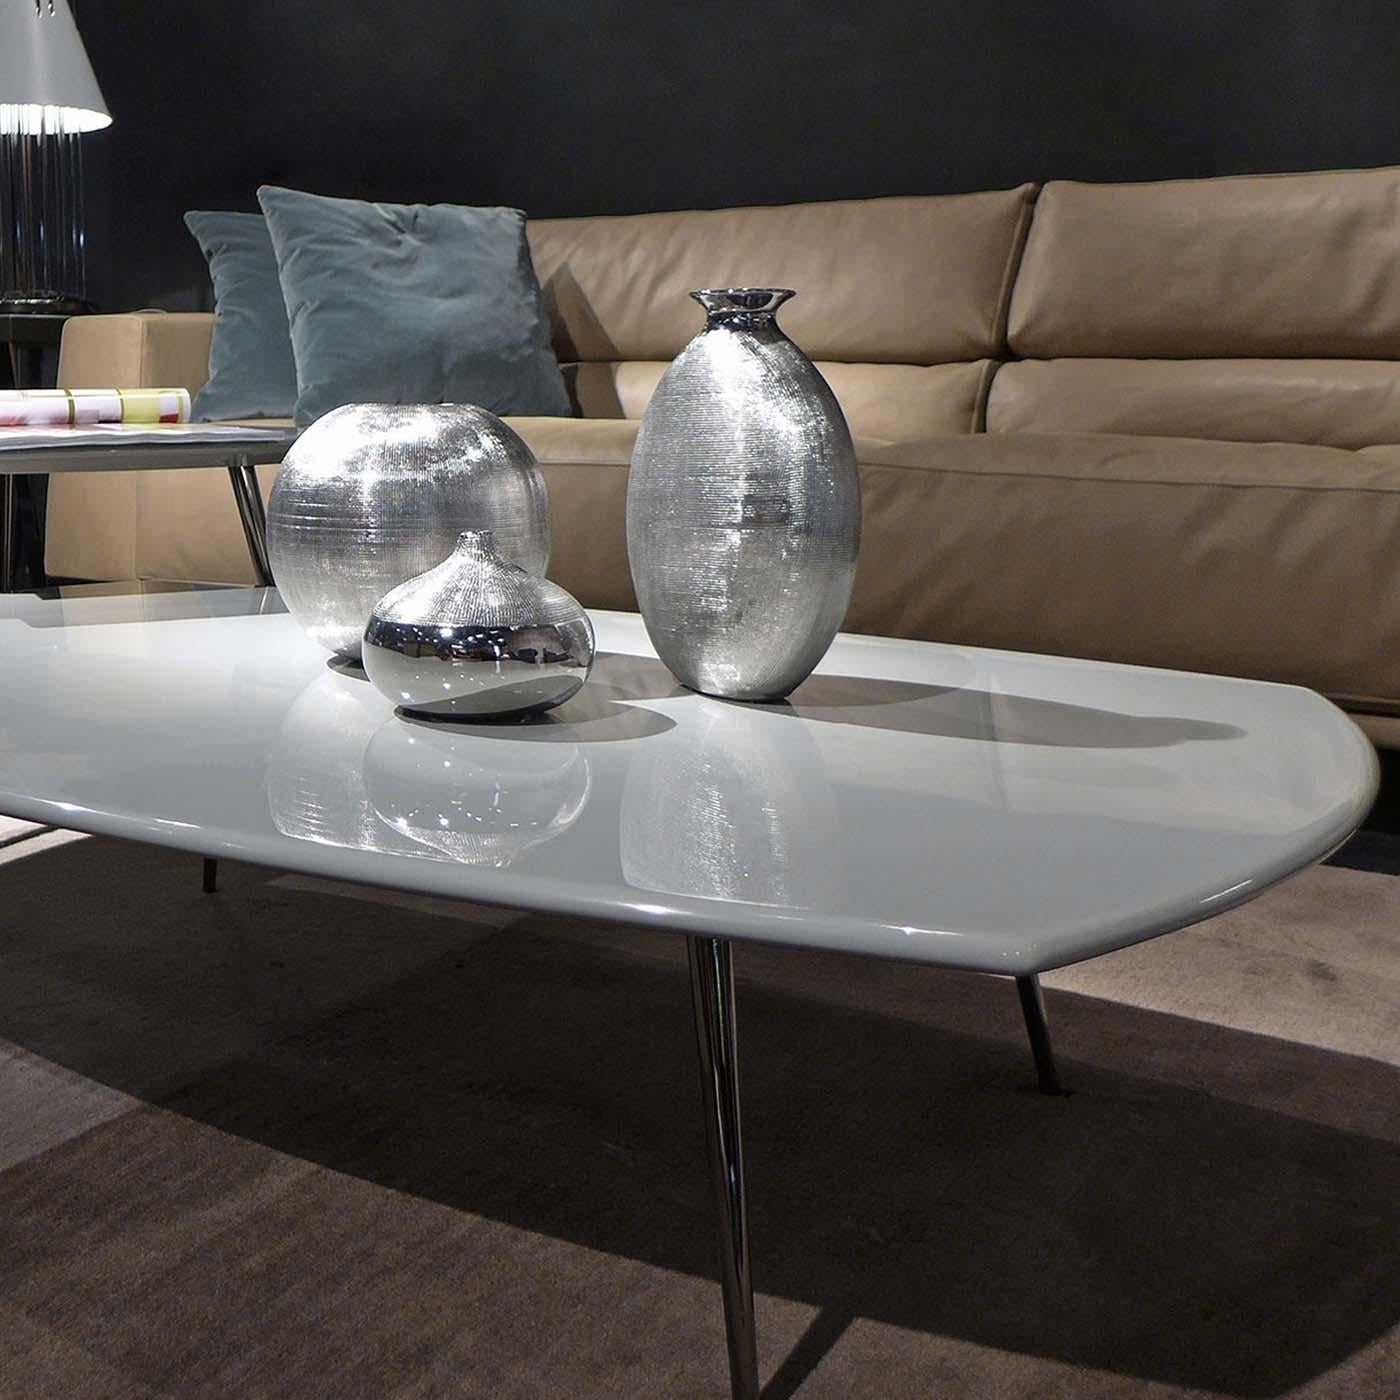 Boasting the retro-chic flair of midcentury-inspired furniture, this set of three coffee tables is a versatile addition to a modern living space. The metal legs with a black chrome finish supports the tops available in MDF either glossy lacquered or